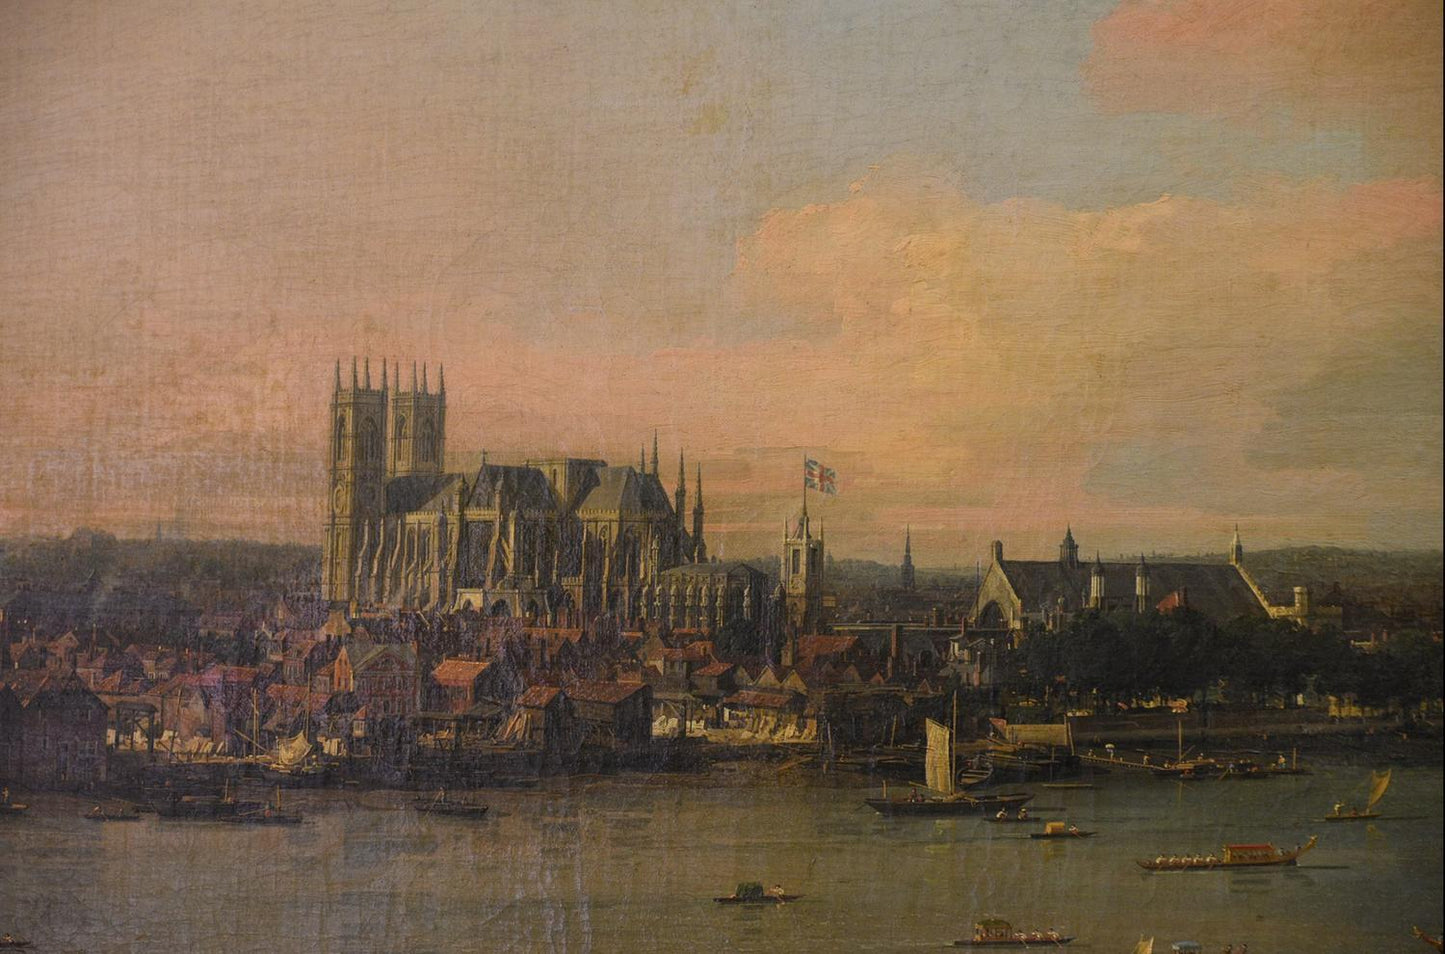 London River Thames looking towards Westminster, Canaletto